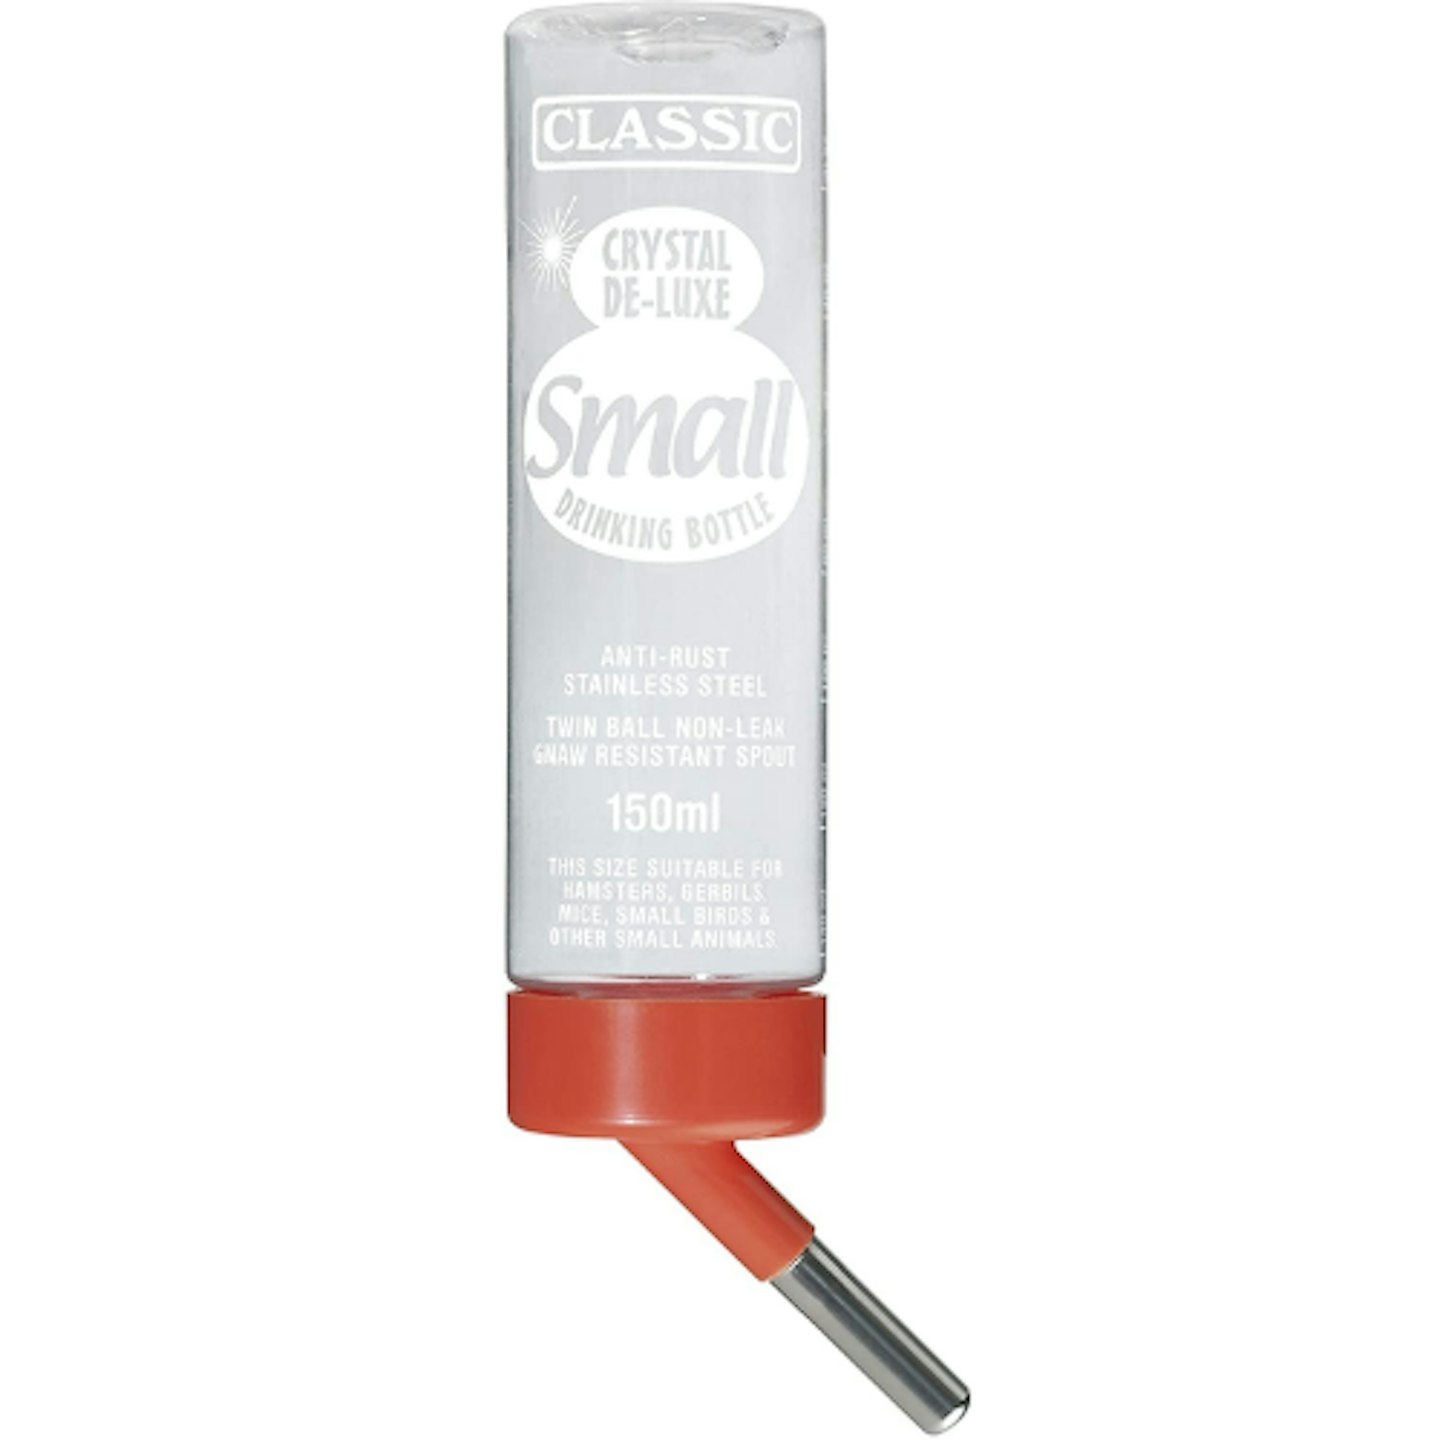 Classic Crystal Deluxe 'Small' - Small Animal Drinking Bottle, 150ml